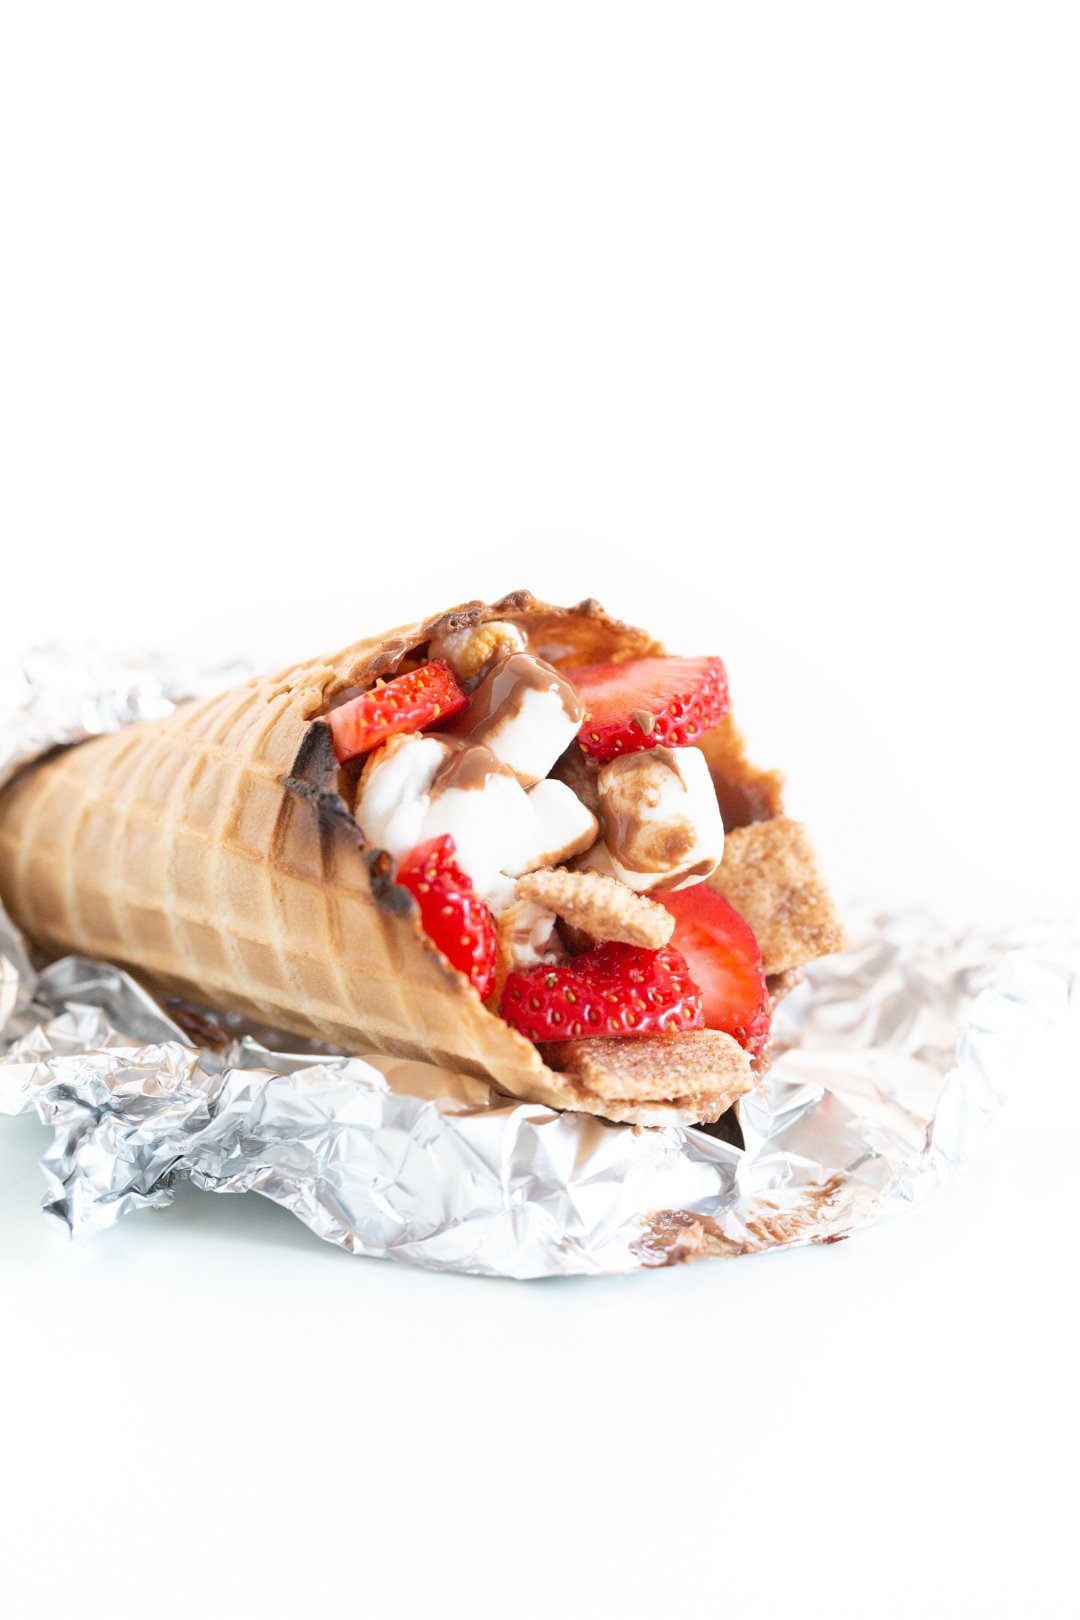 campfire cone resting on foil revealing the melted marshmallows, melted chocolate, strawberry chunks and cinnamon graham cereal inside,